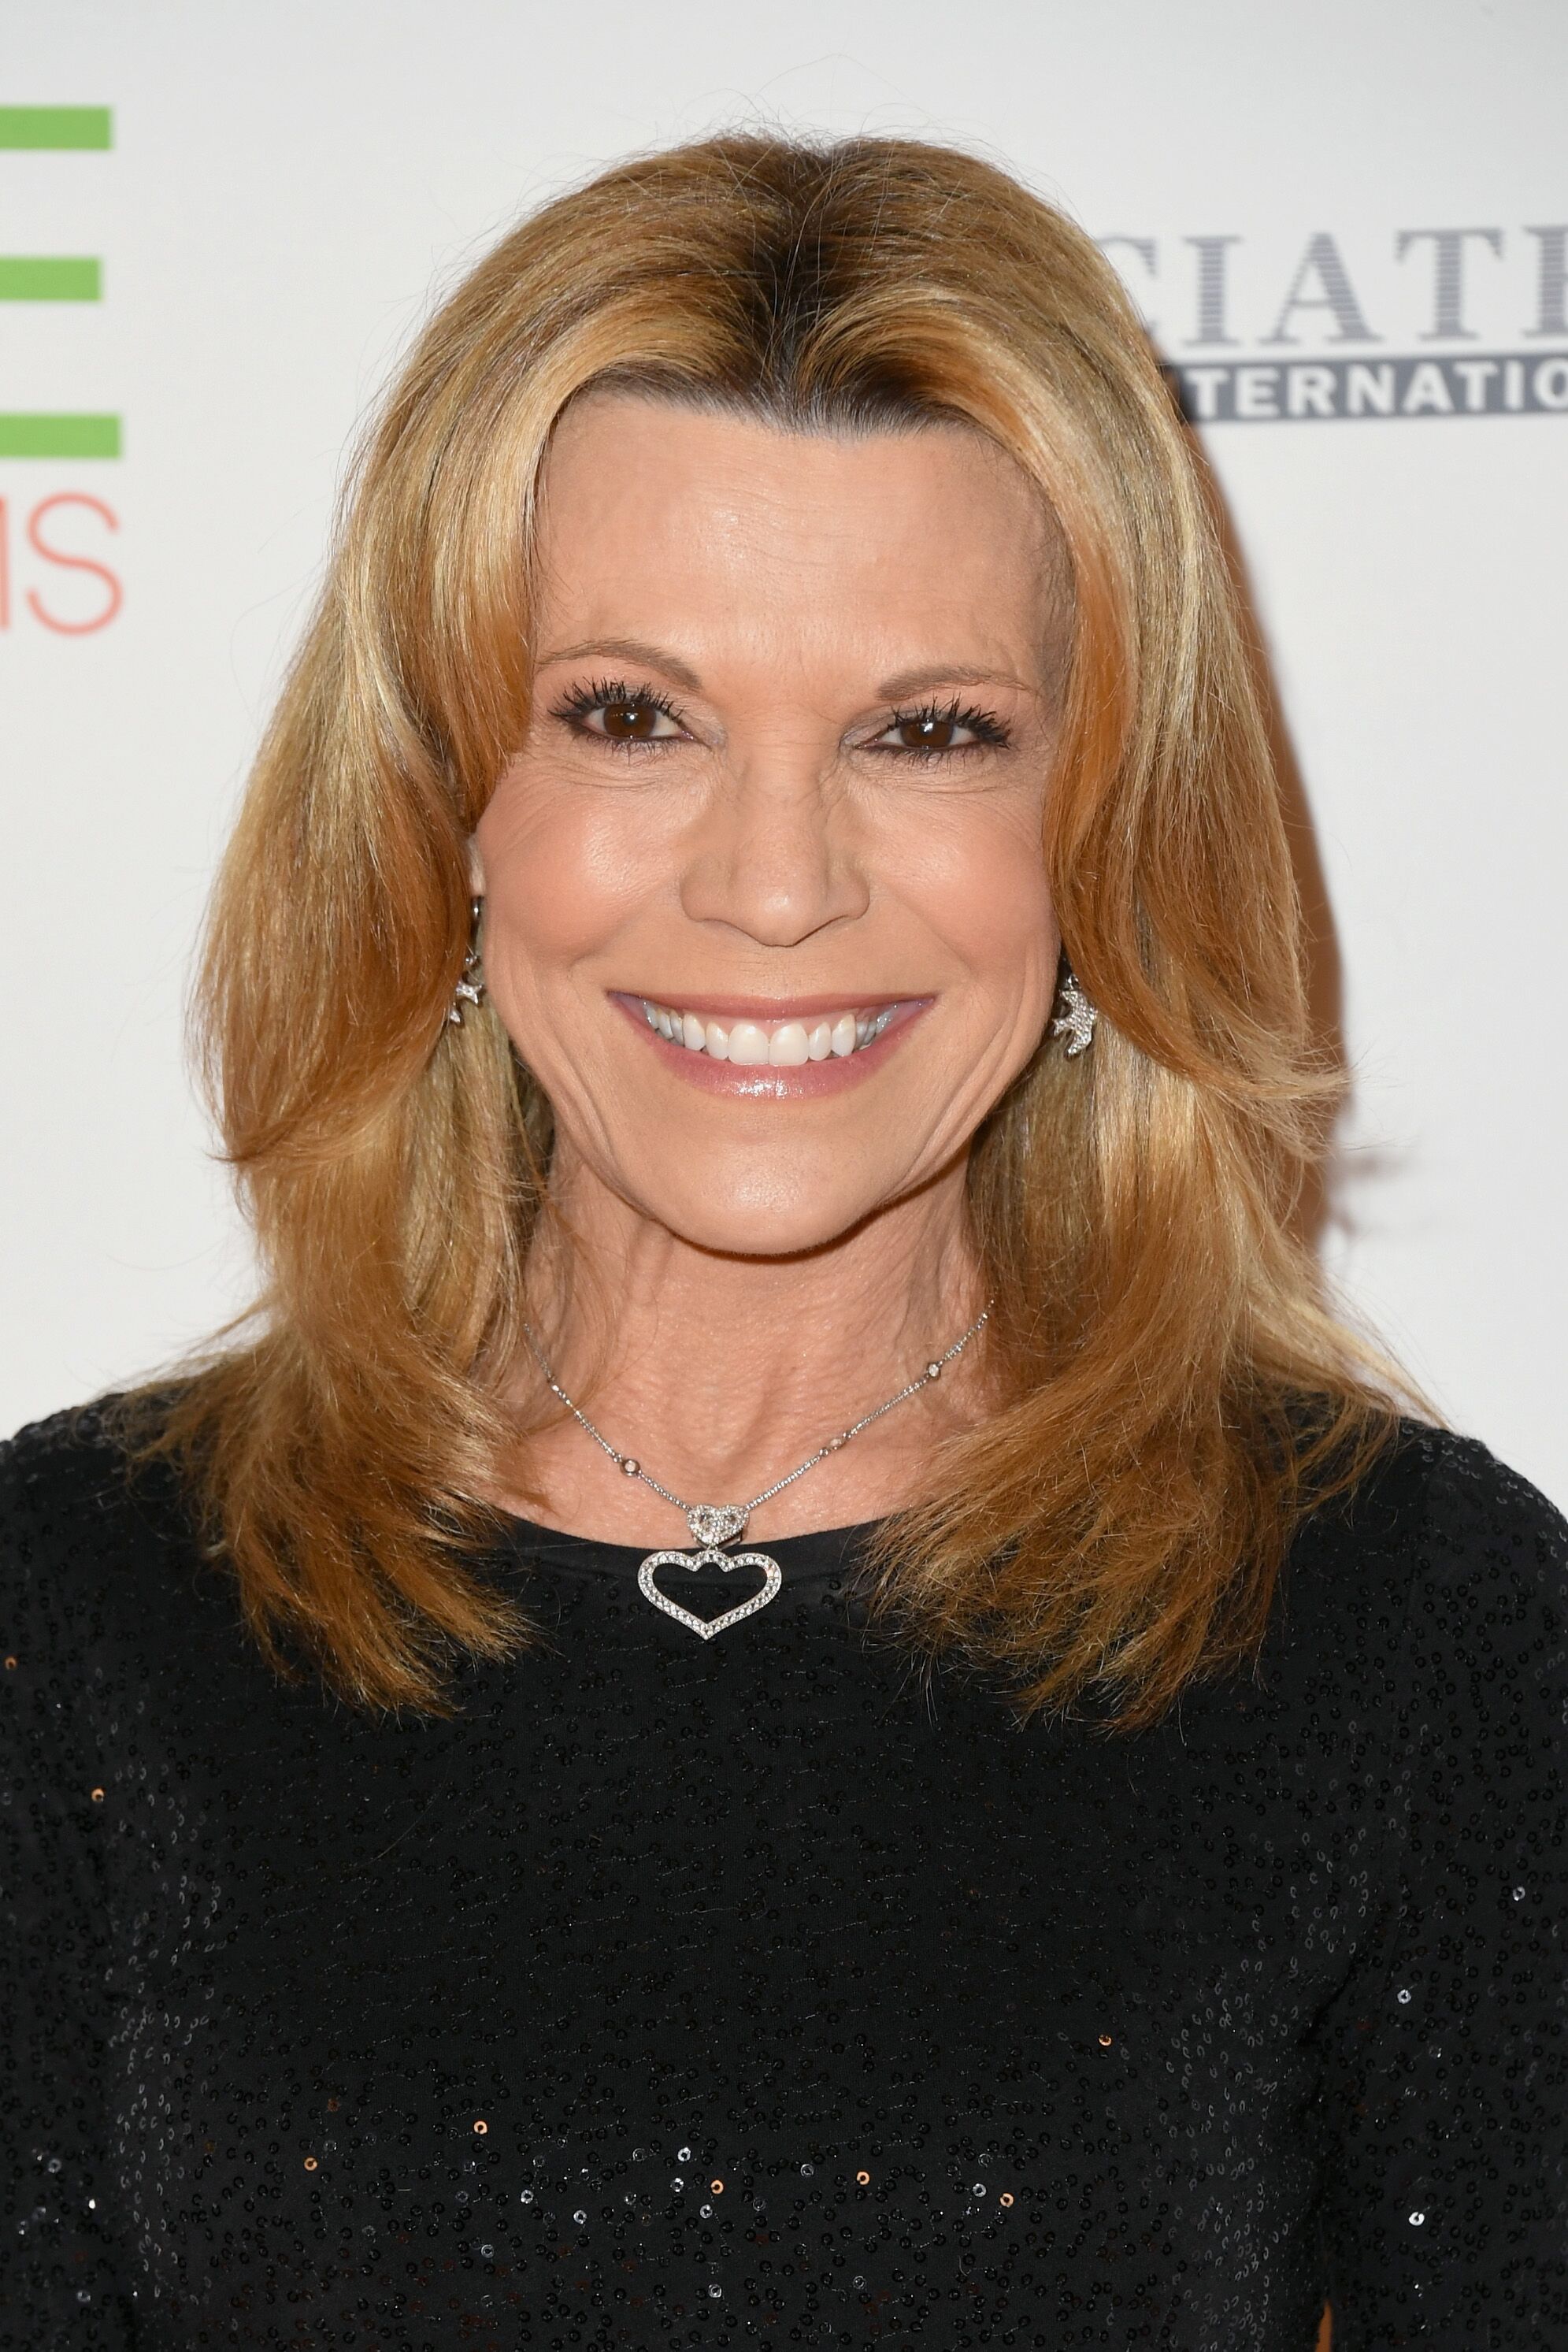 Vanna White attends the 25th Annual Race To Erase MS Gala. | Source: Getty Images